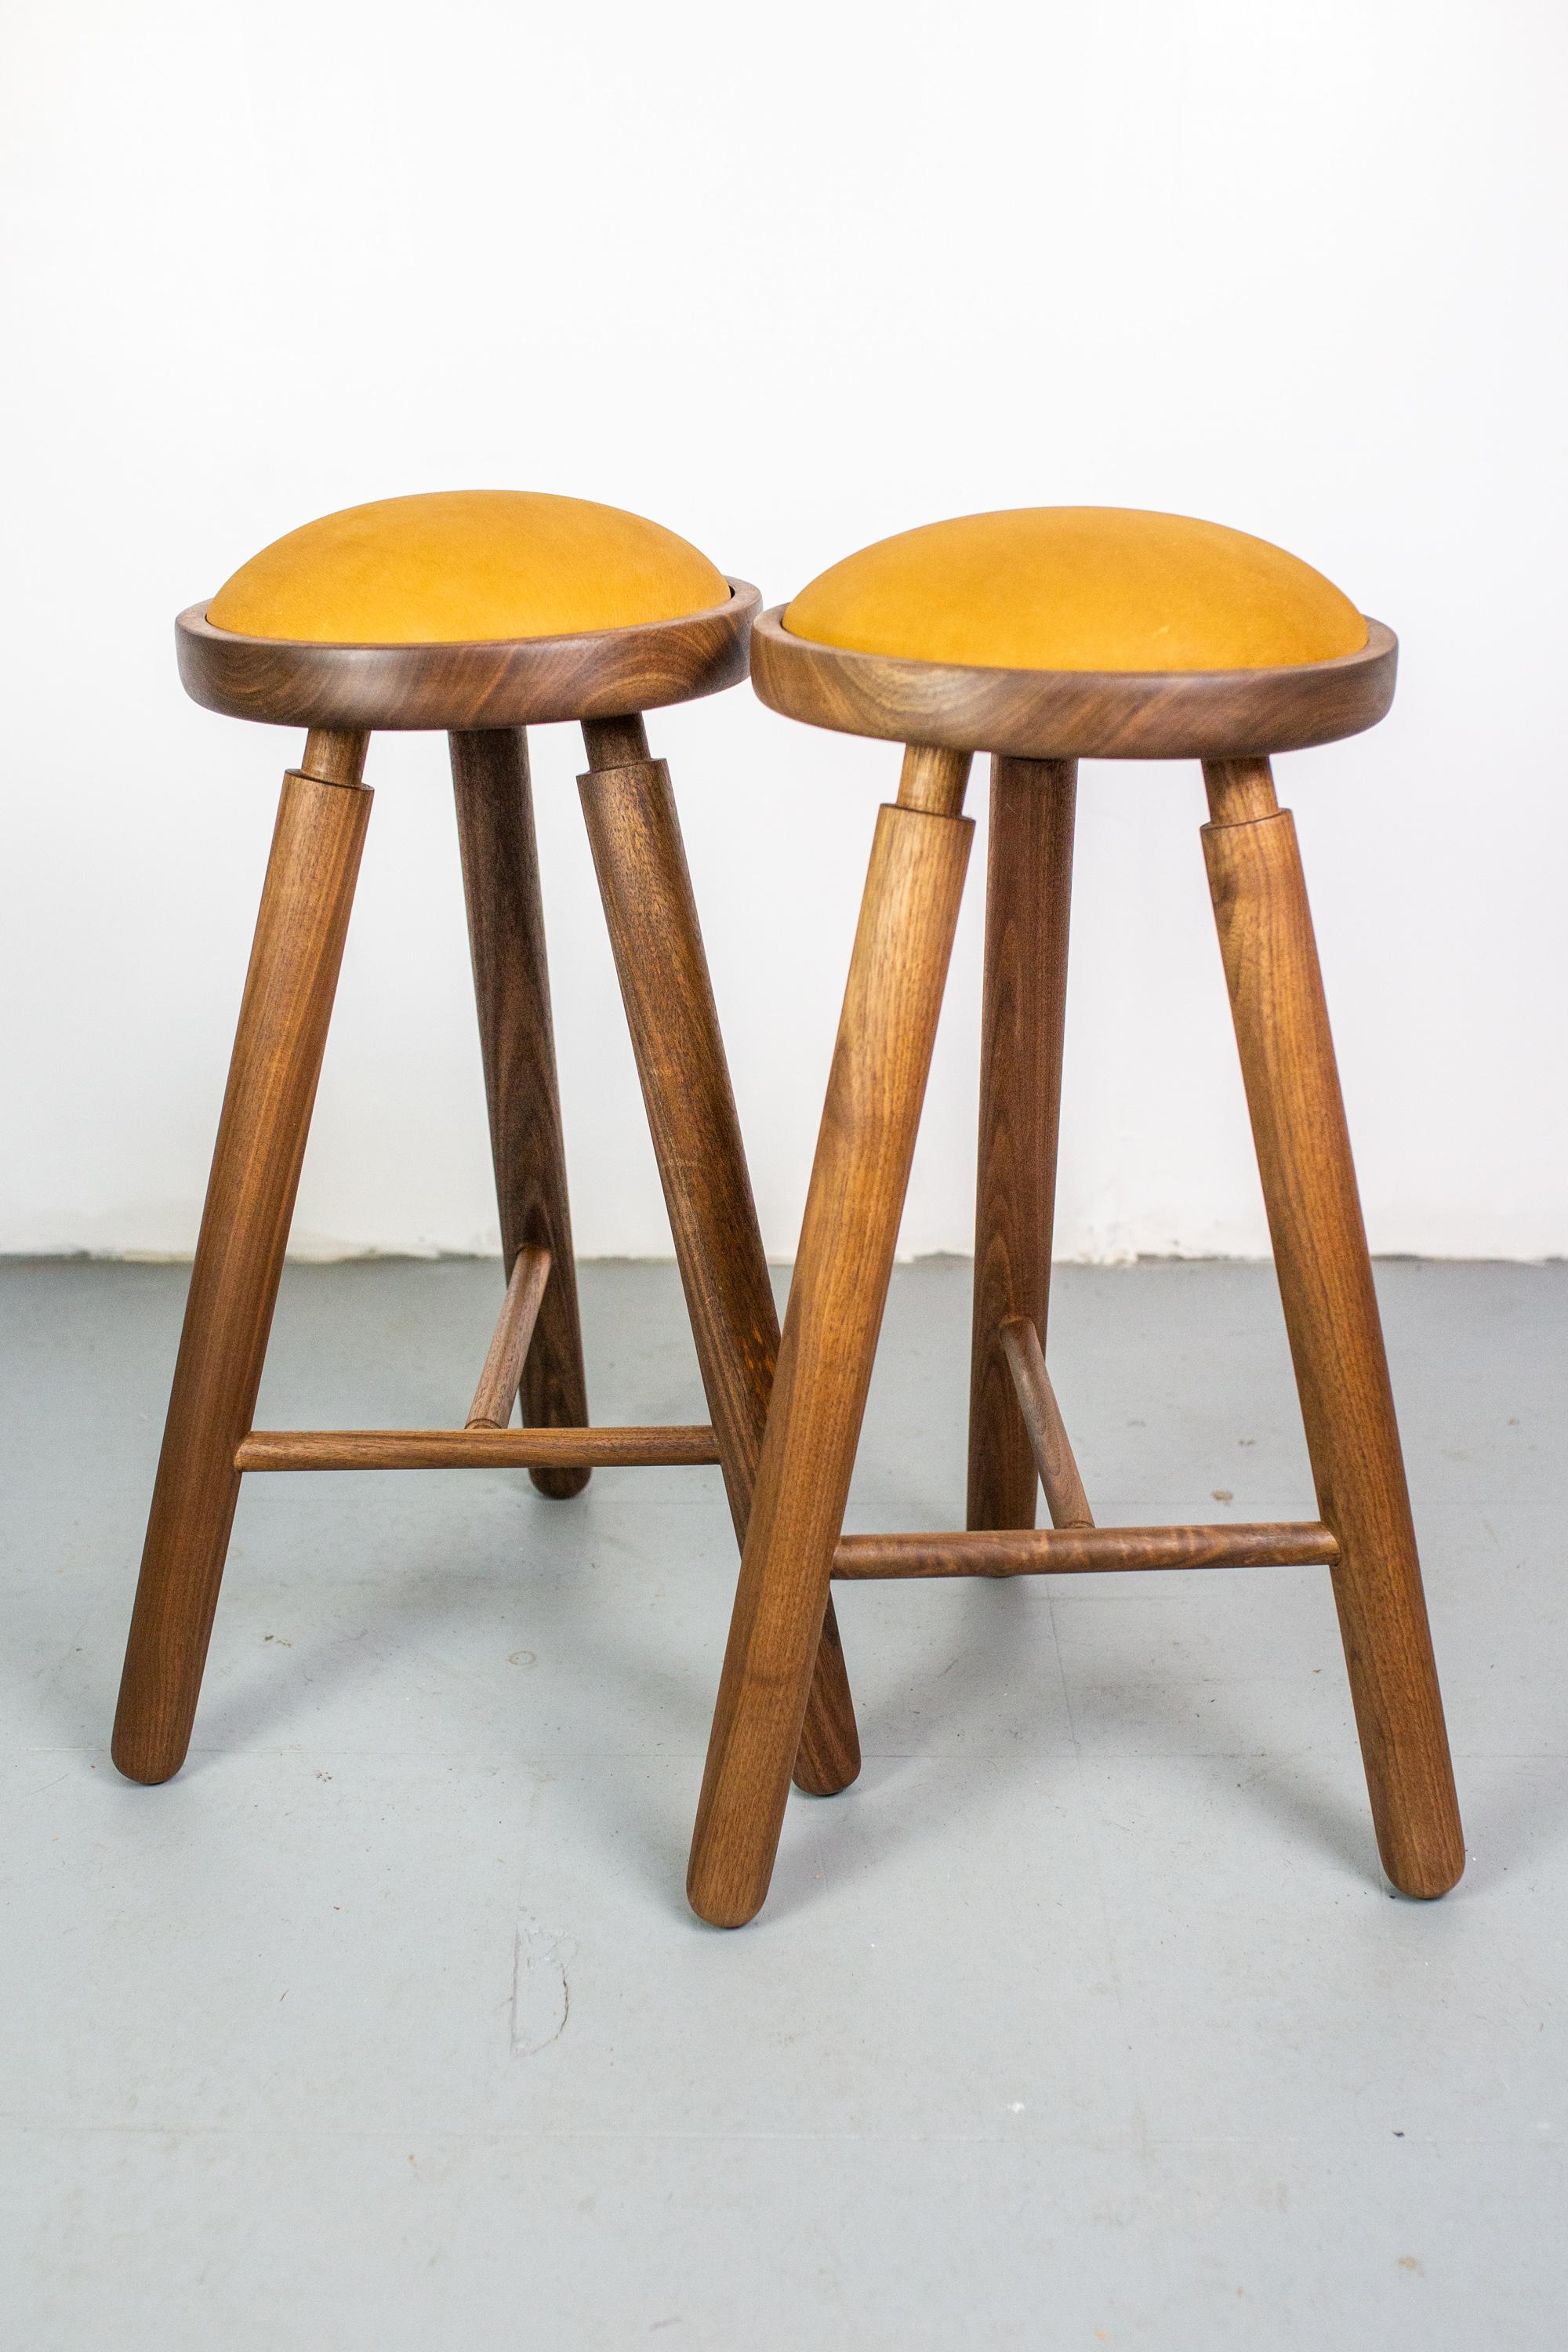 Pair of Michael Rozell Studio Bar Stools Figured Walnut and Leather USA, 2020 For Sale 2